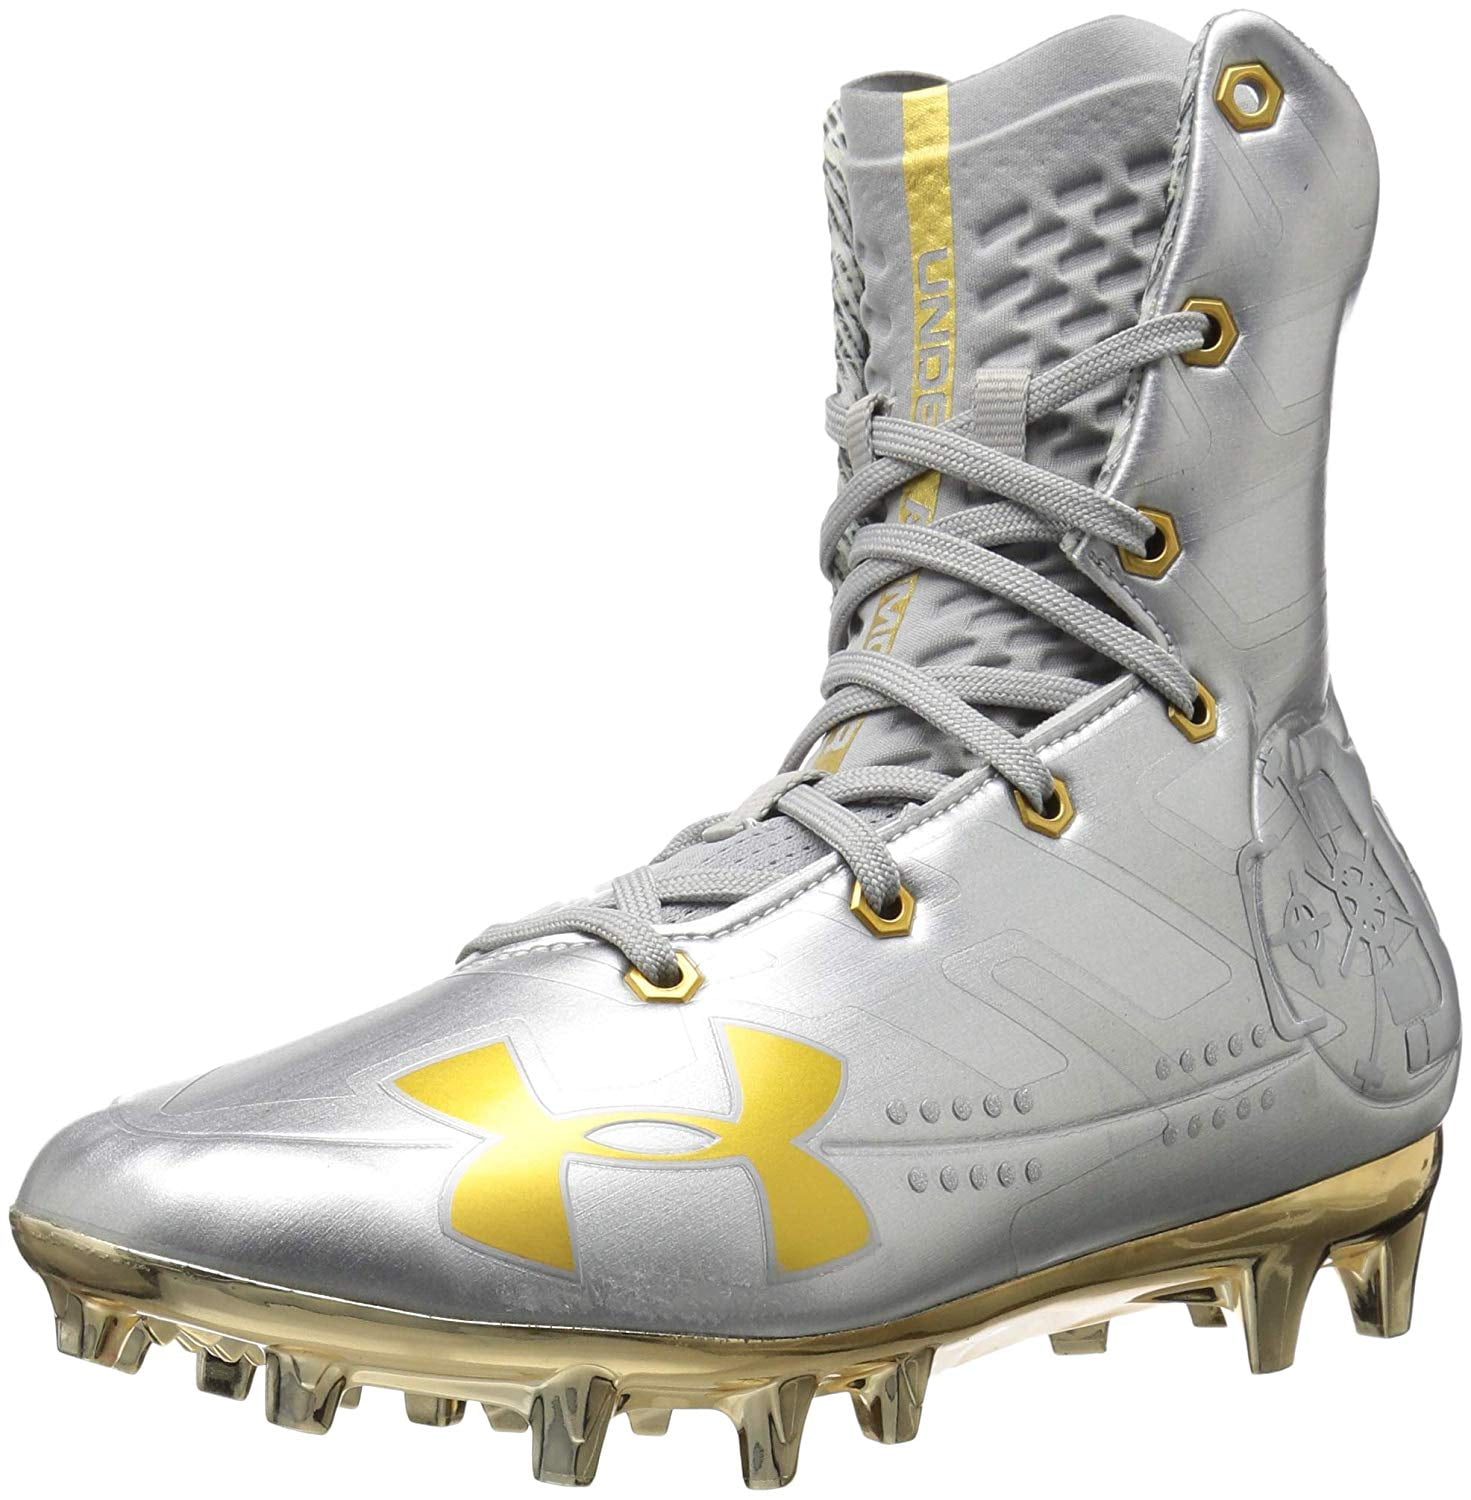 limited edition football cleats